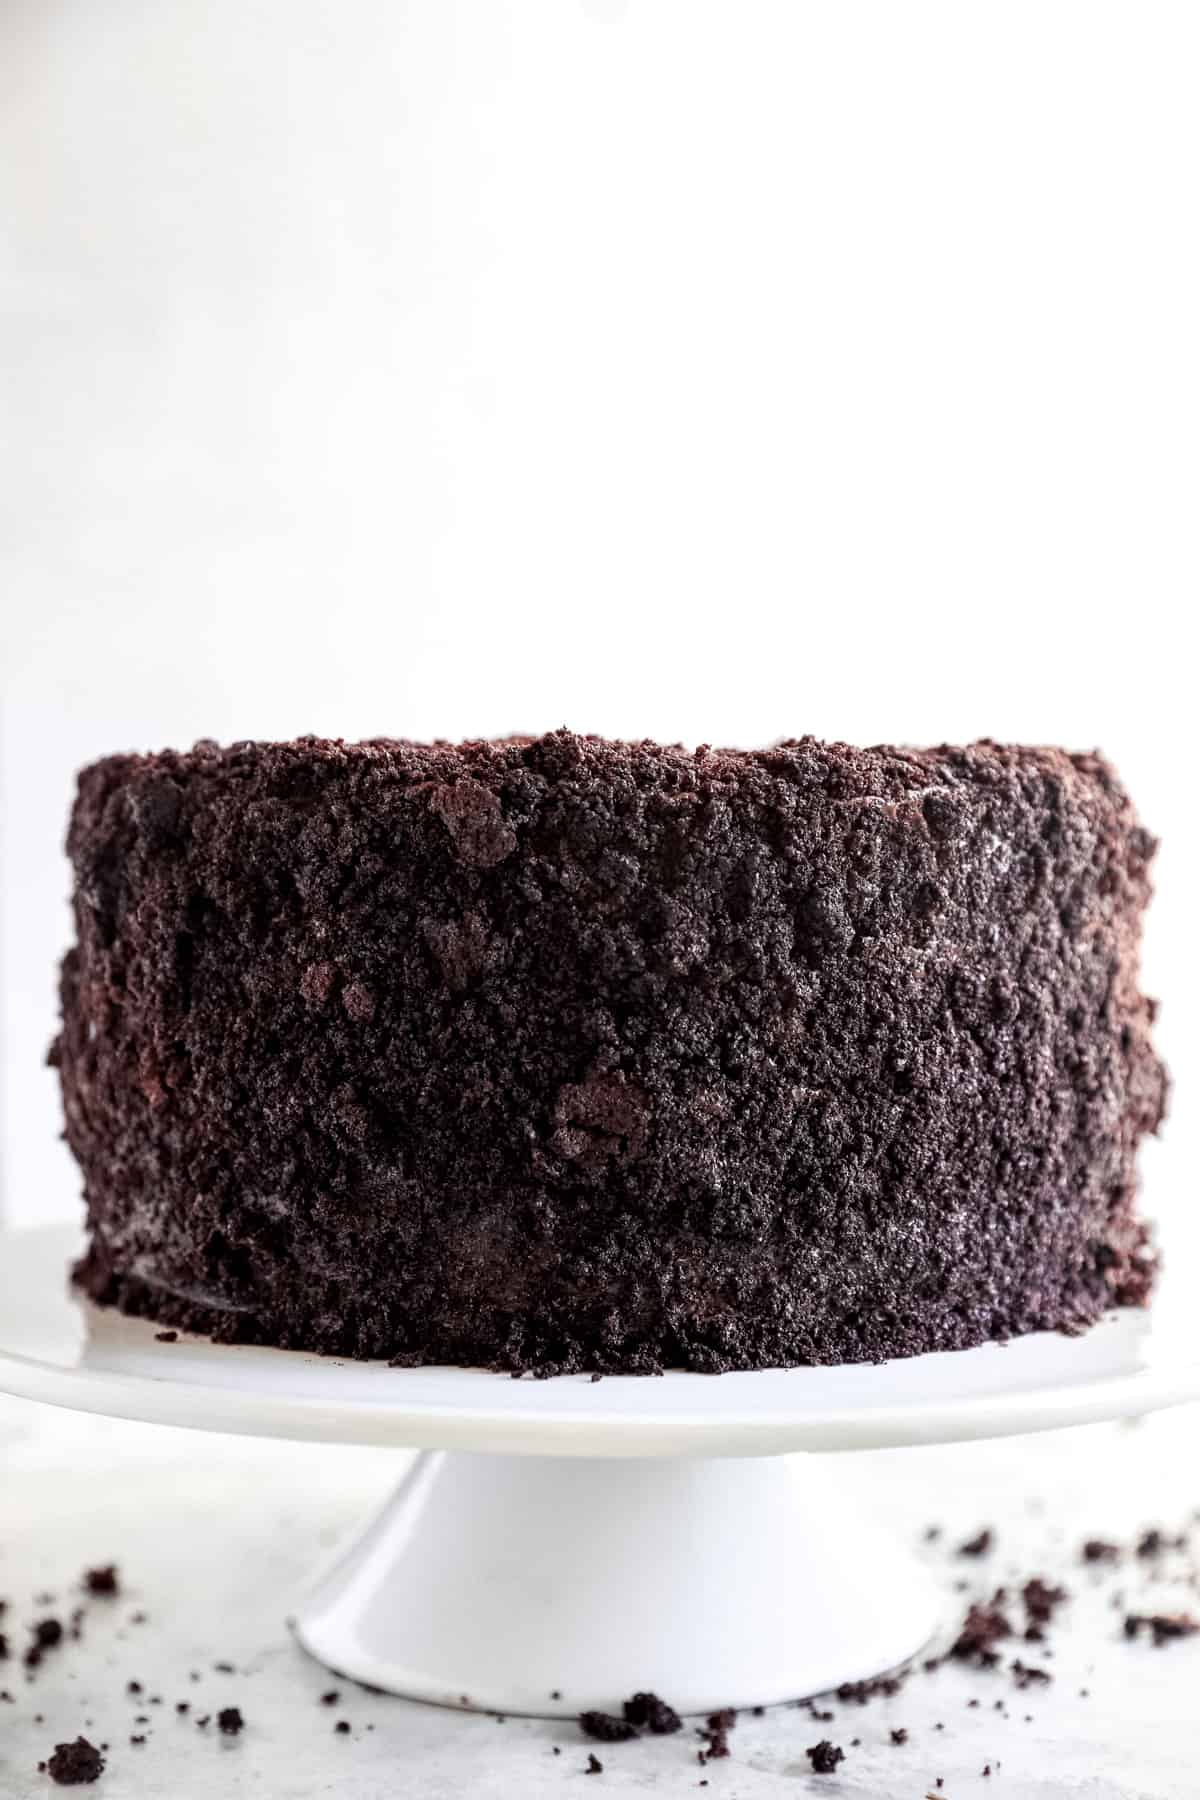 Brooklyn blackout cake on a cake stand